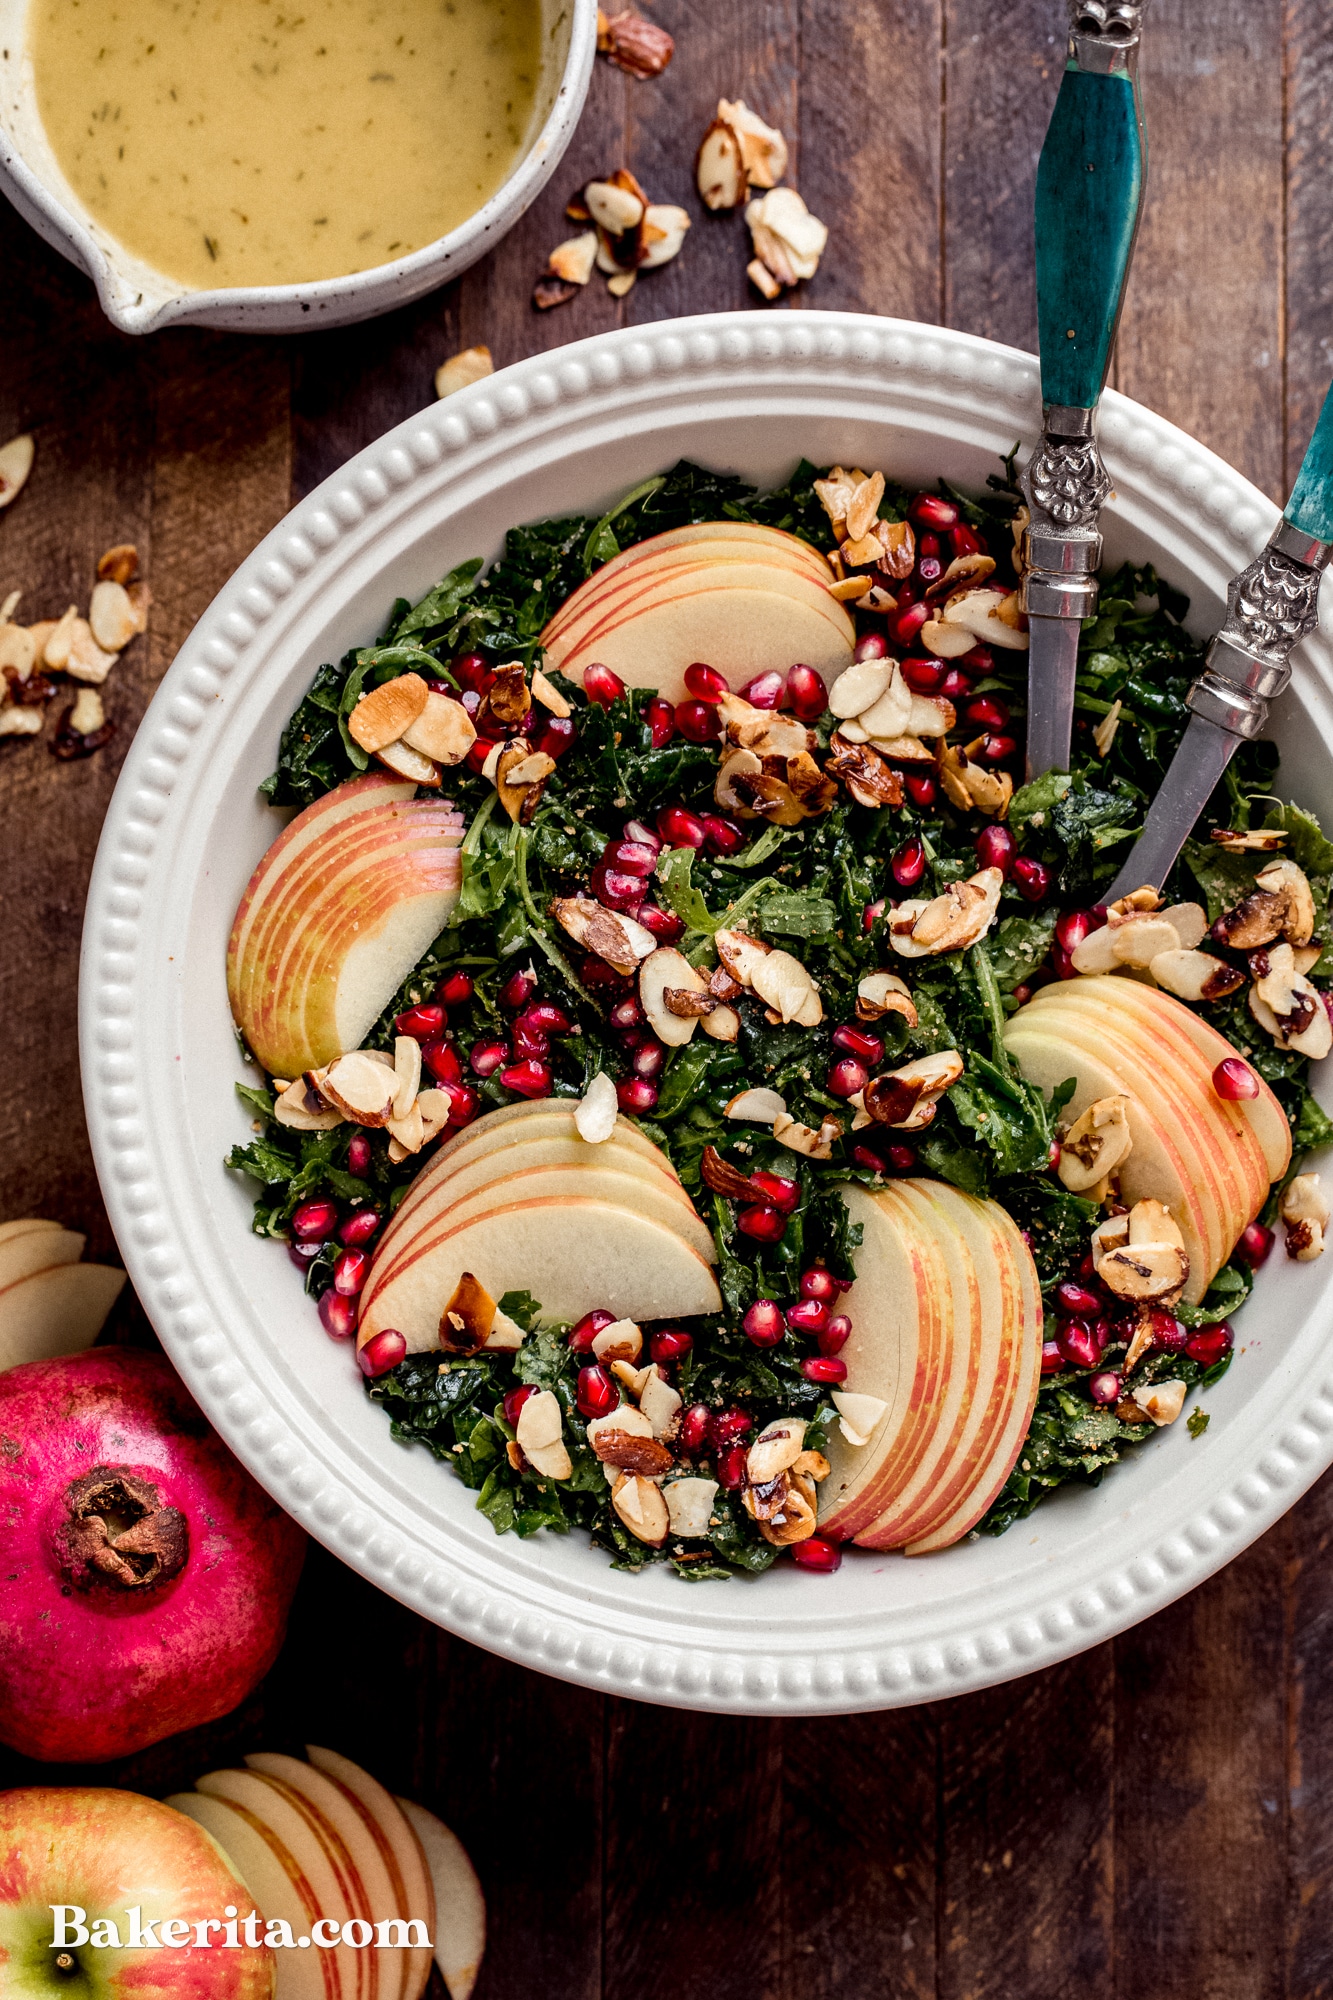 This Autumn Kale Harvest Salad brings together the best of fall's produce into a beautiful salad. With thinly sliced kale, pomegranate seeds, Honeycrisp apple slices, candied almond slices, and tossed in a lusciously sweet and tangy Apple Cider Vinaigrette. It's healthy, simple, beautiful, and the perfect accompaniment to your holiday meal or autumn dinner table.